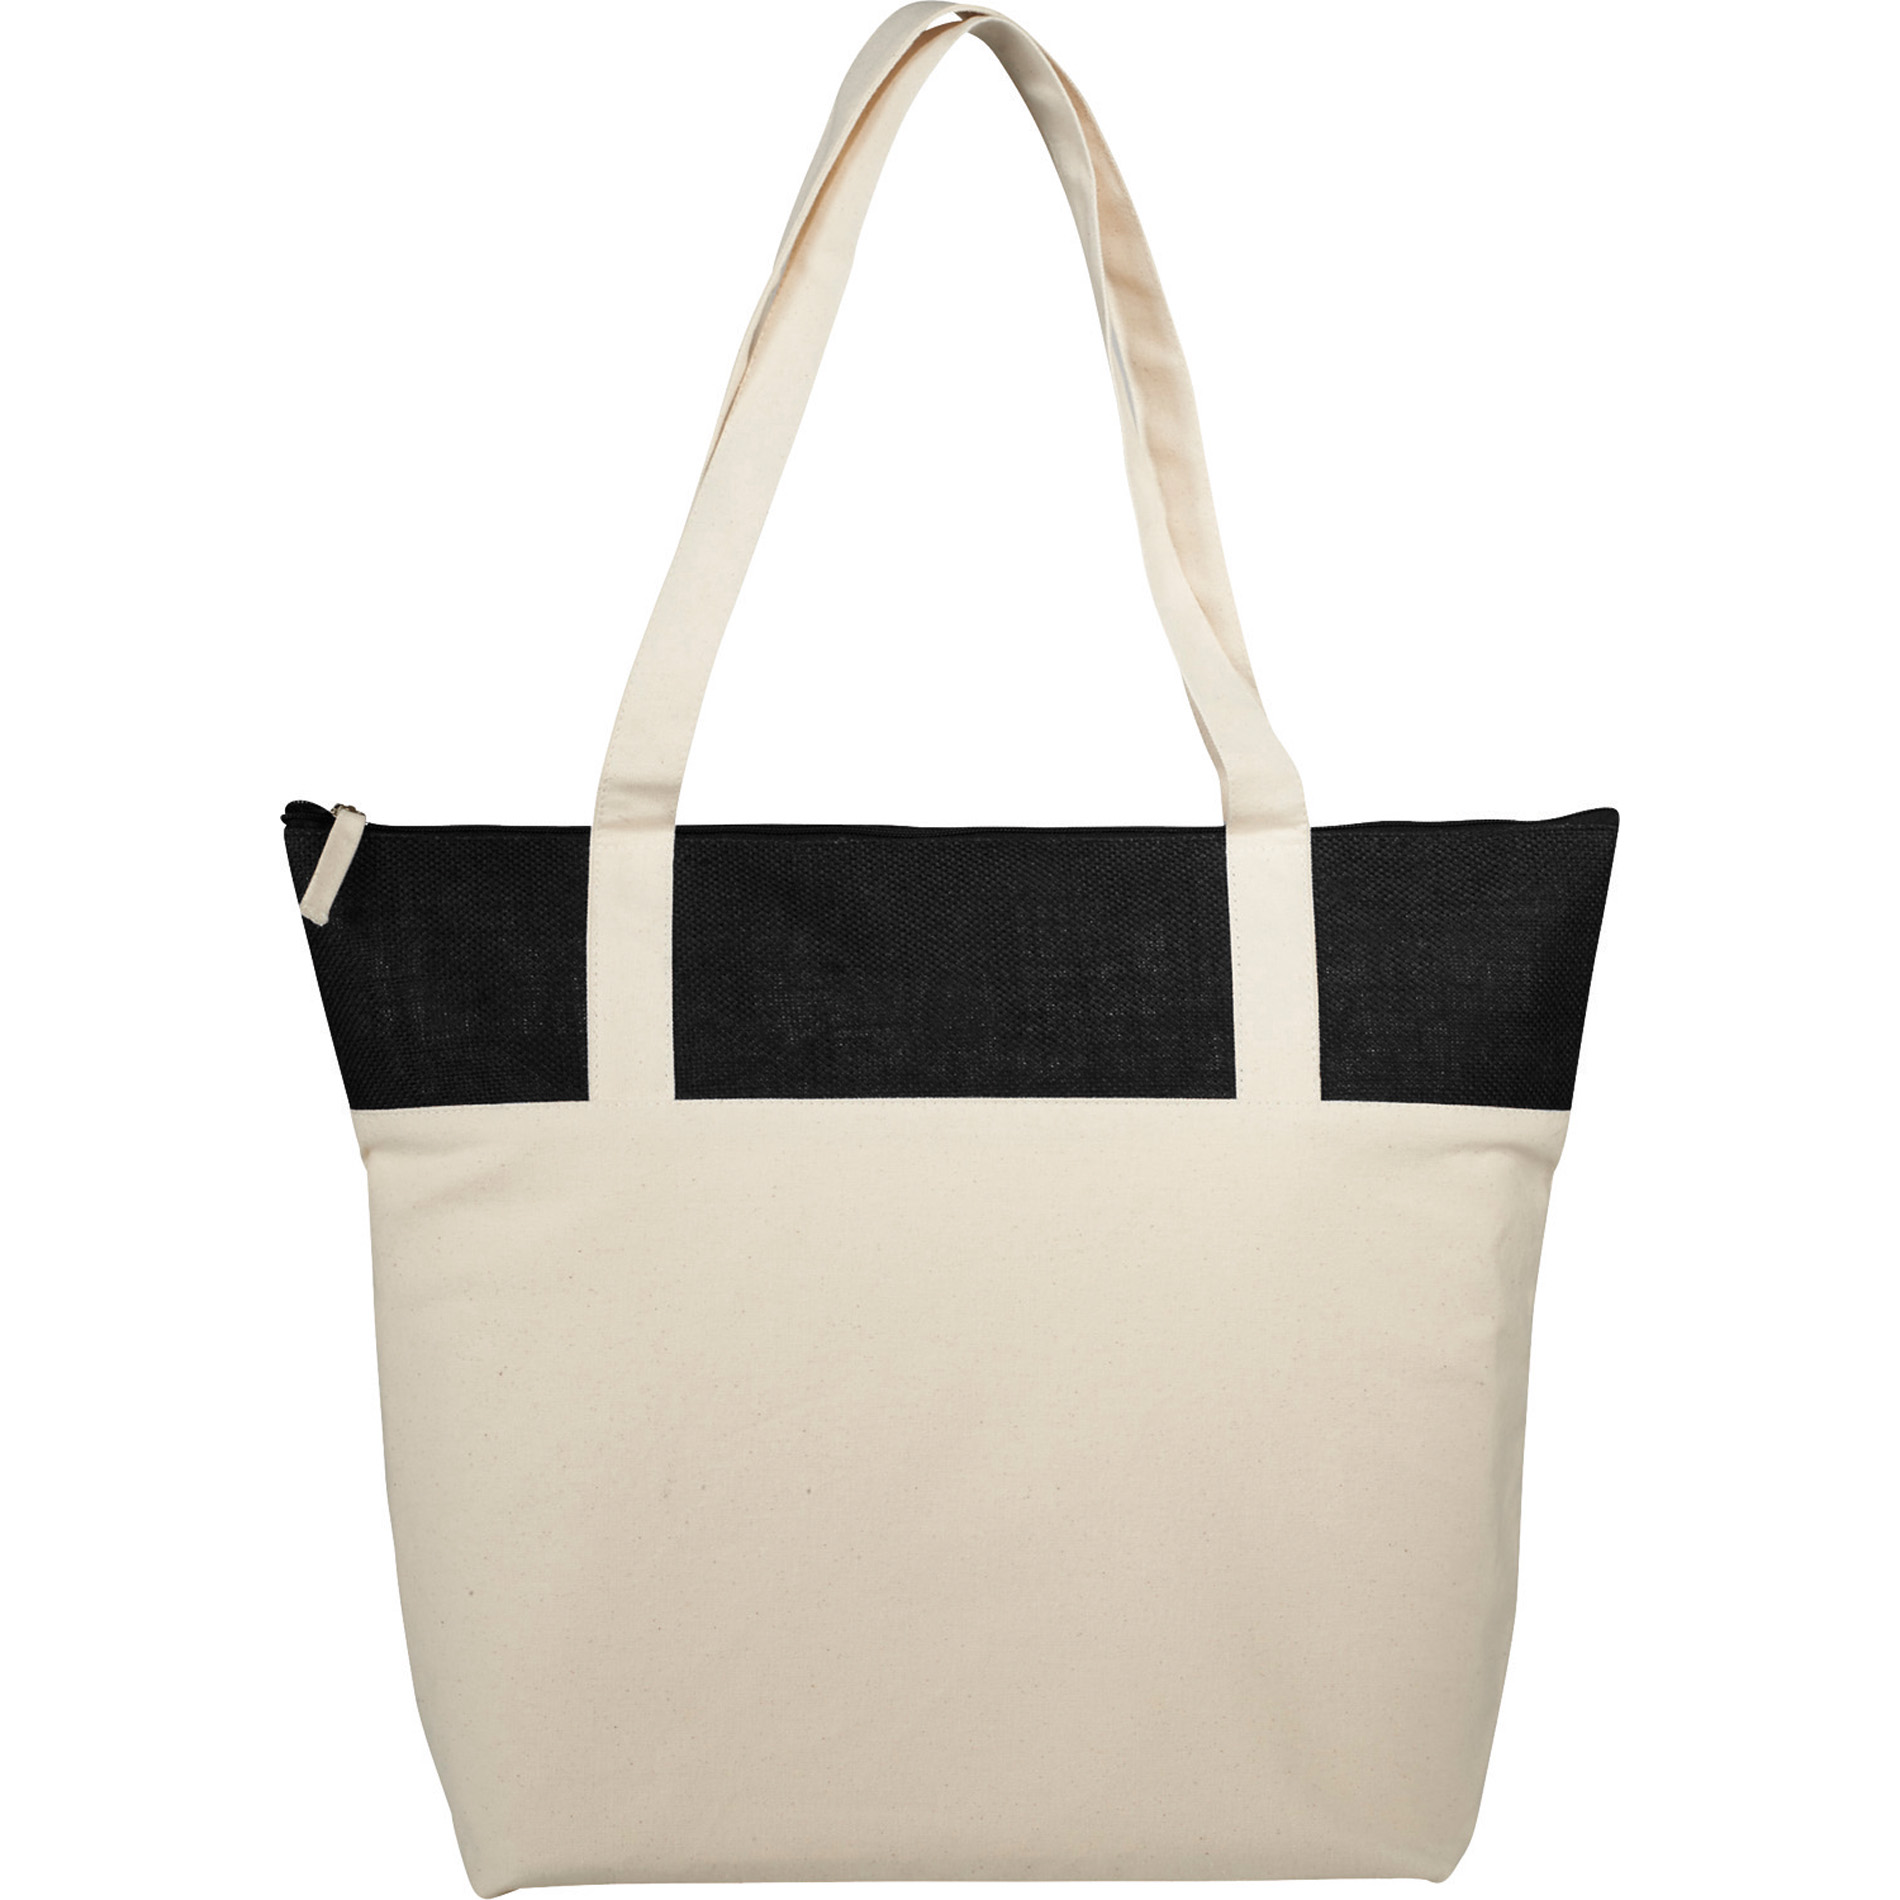 LEEDS 7900-72 - 12 oz. Cotton Canvas and Jute Accent Zippered Tote